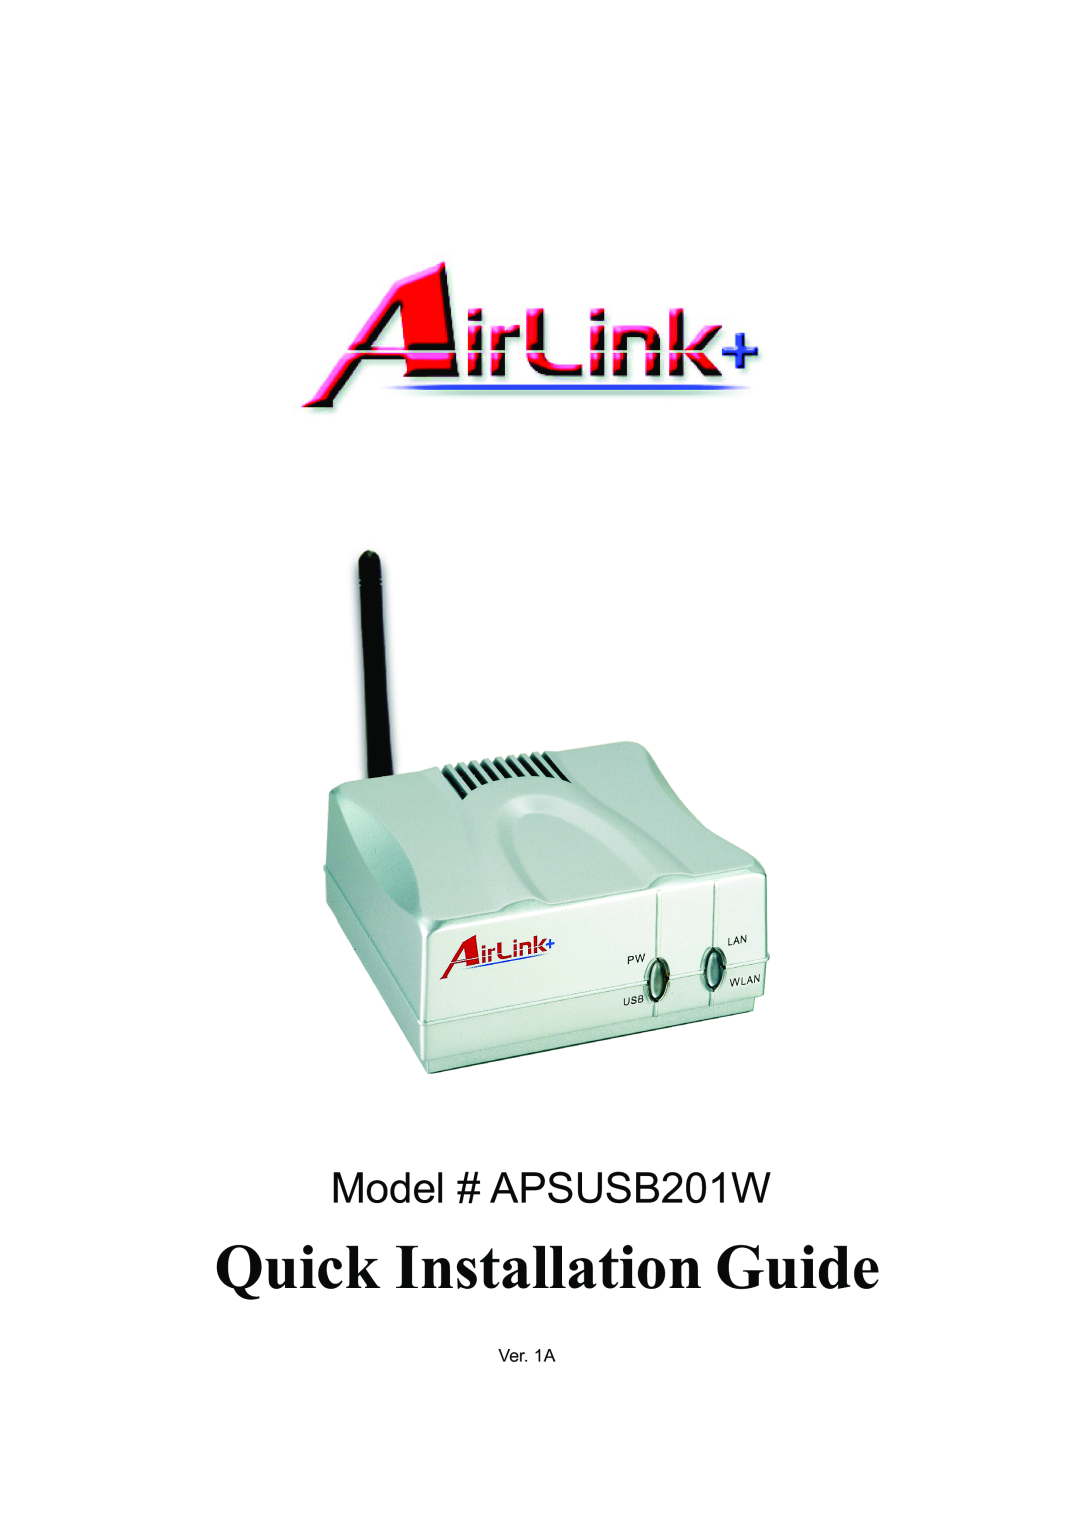 Airlink manual Quick Installation Guide, Model # APSUSB201W, Ver. 1A 